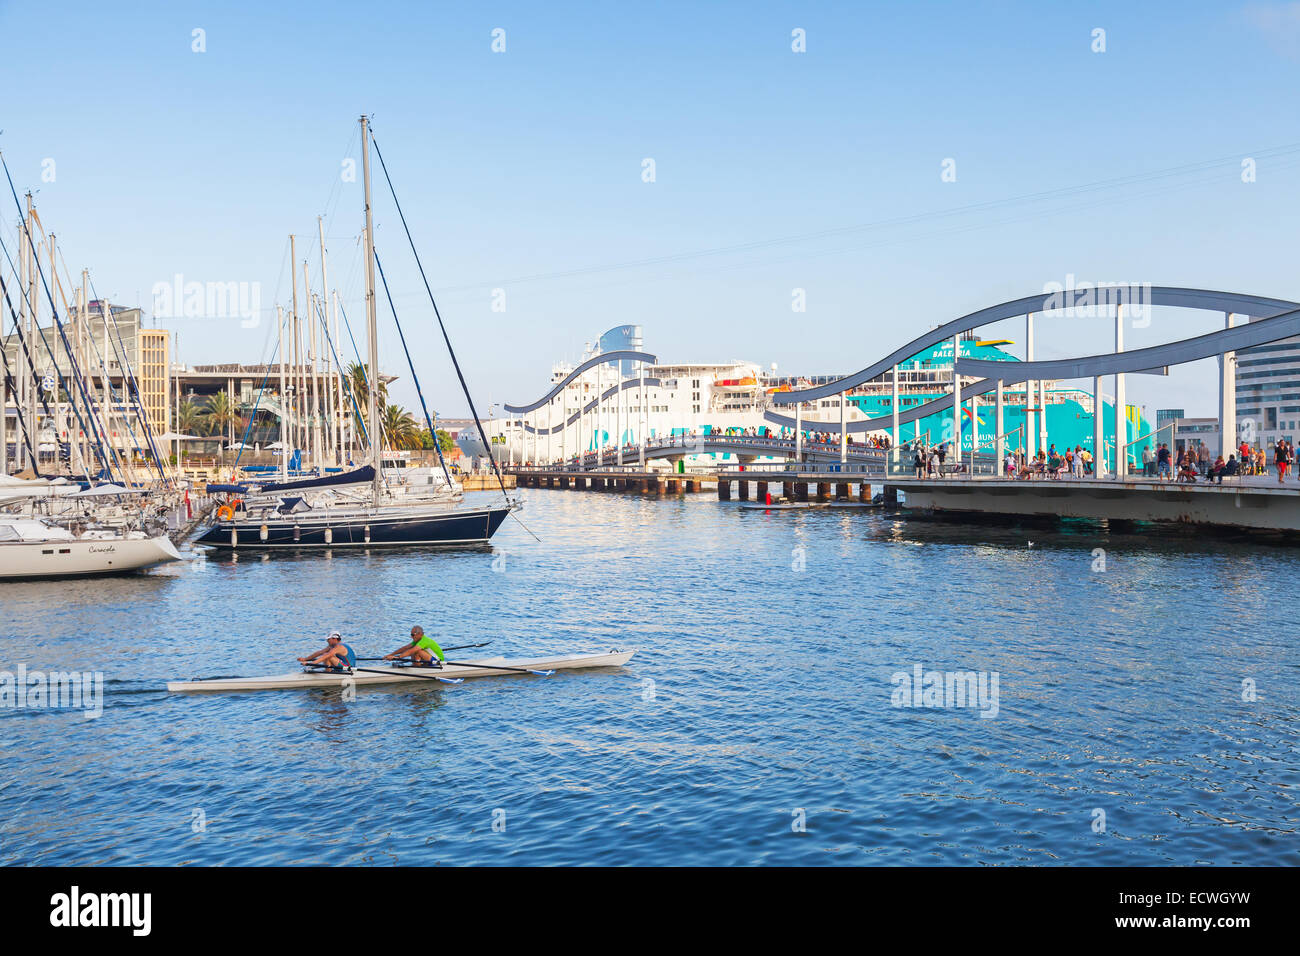 Barcelona, Spain - August 26, 2014: Twin racing rowing boat goes in Vista port harbor with walkway Bridge on a background Stock Photo